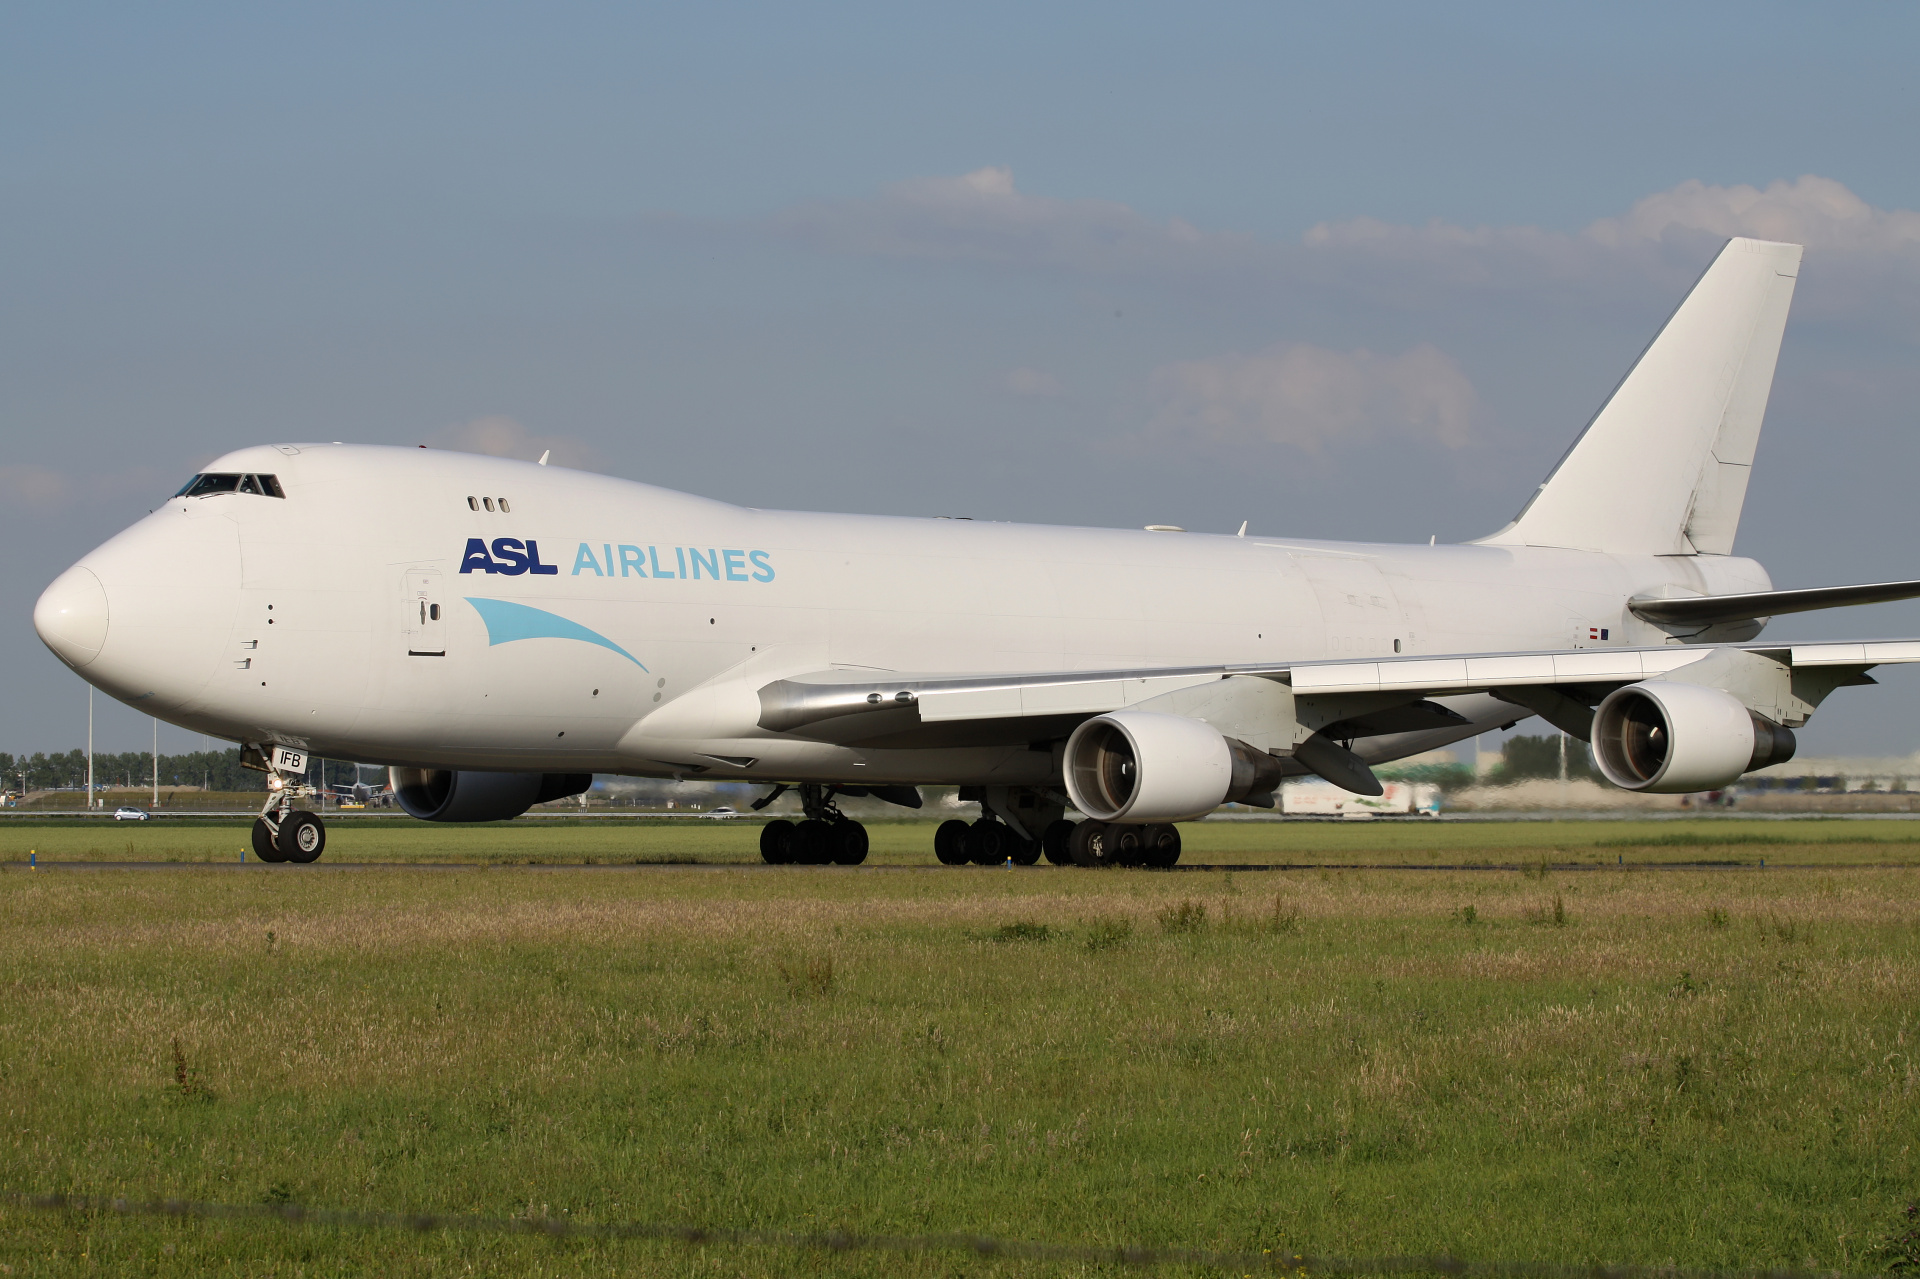 OE-IFB, ASL Airlines Belgium (Samoloty » Spotting na Schiphol » Boeing 747-400F)